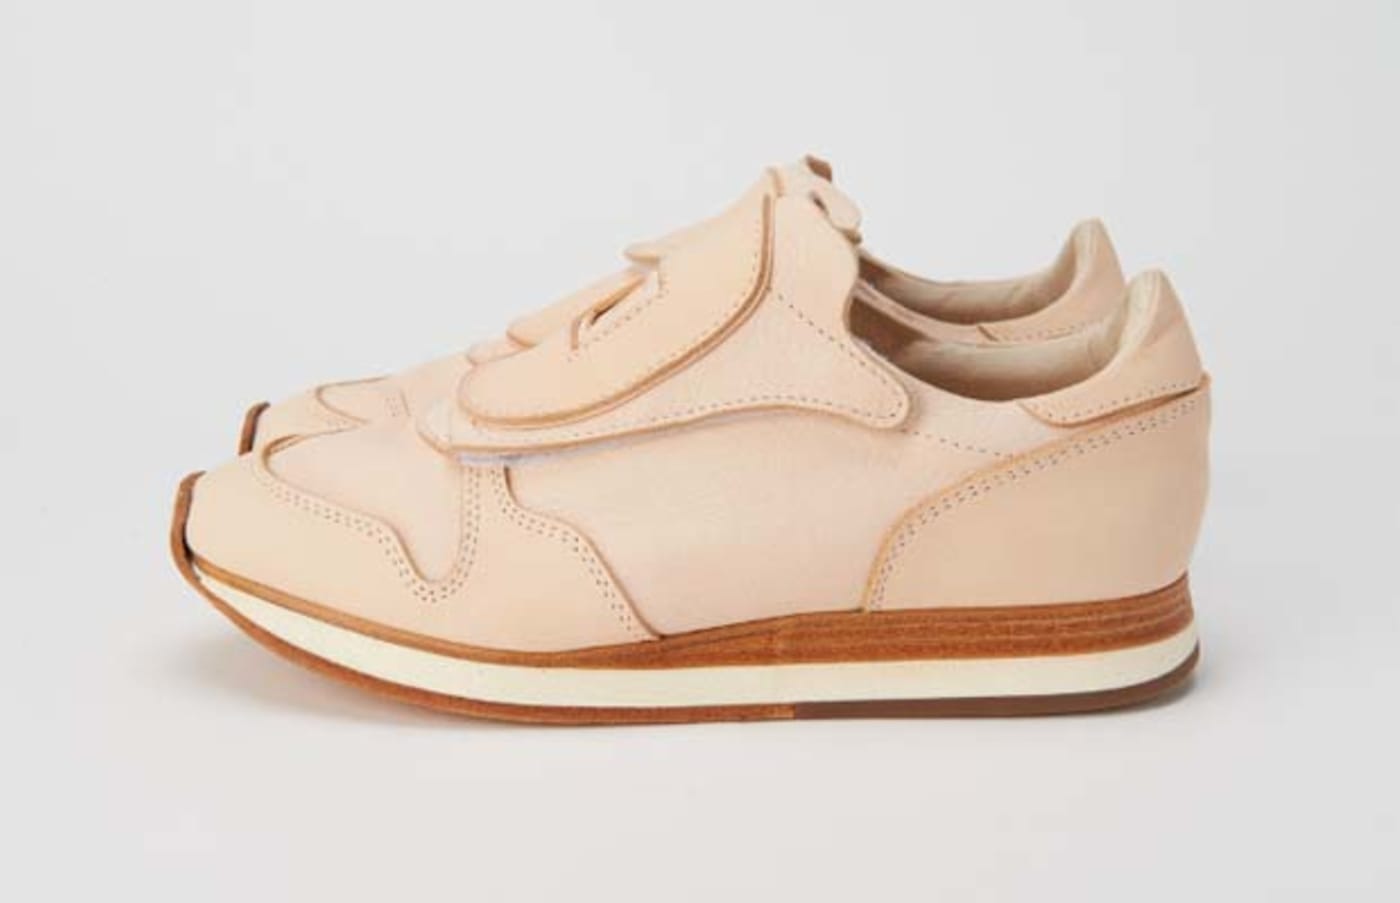 Hender Scheme Pays a Luxurious Homage to a Familiar Computerized ...